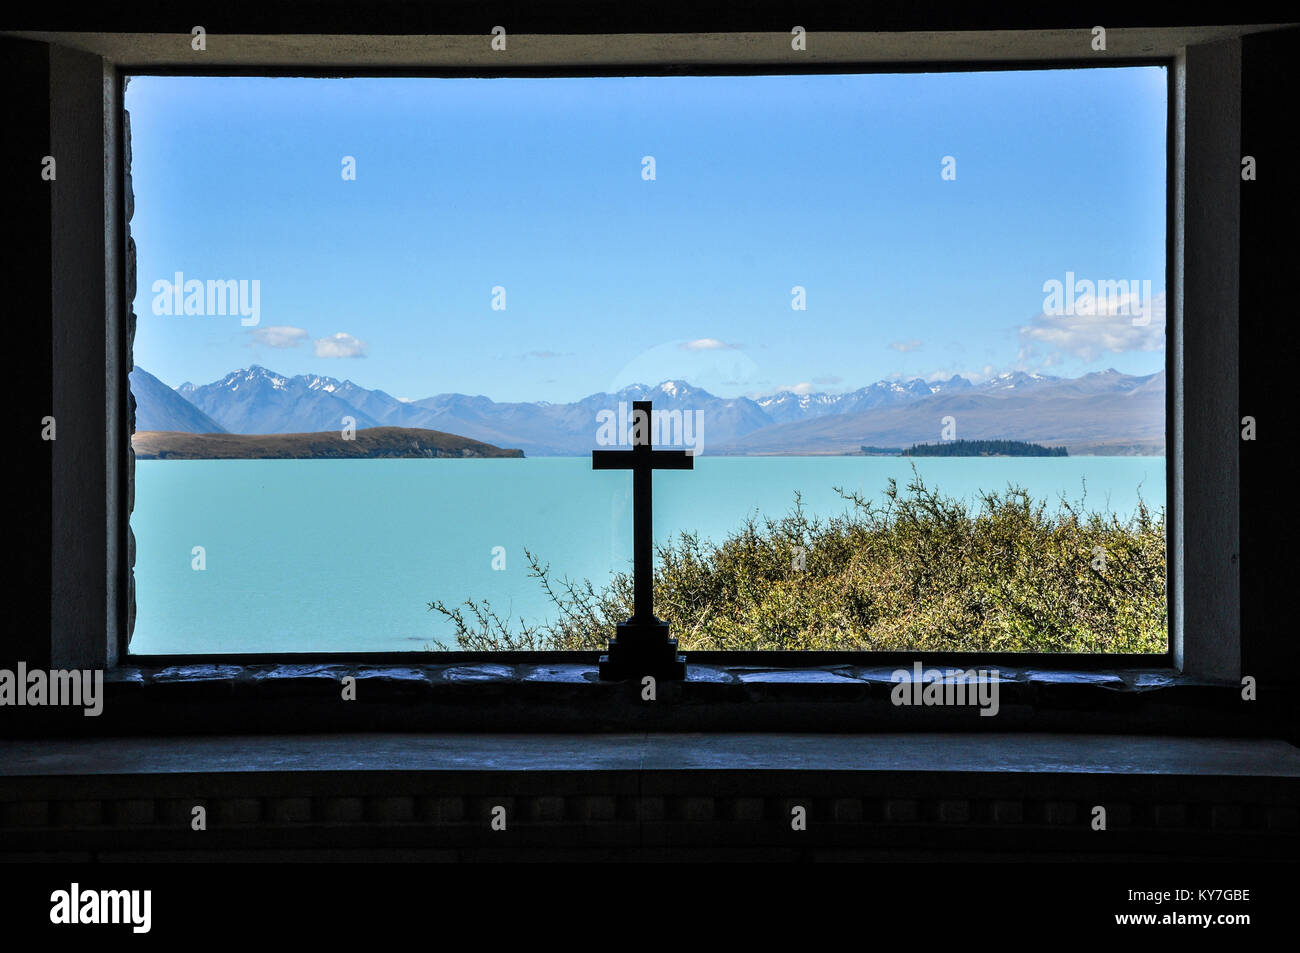 Church of the Good Shepherd on Lake Tekapo New Zealand which was the first church built in the Mackenzie Basin. View through window to blue water Stock Photo